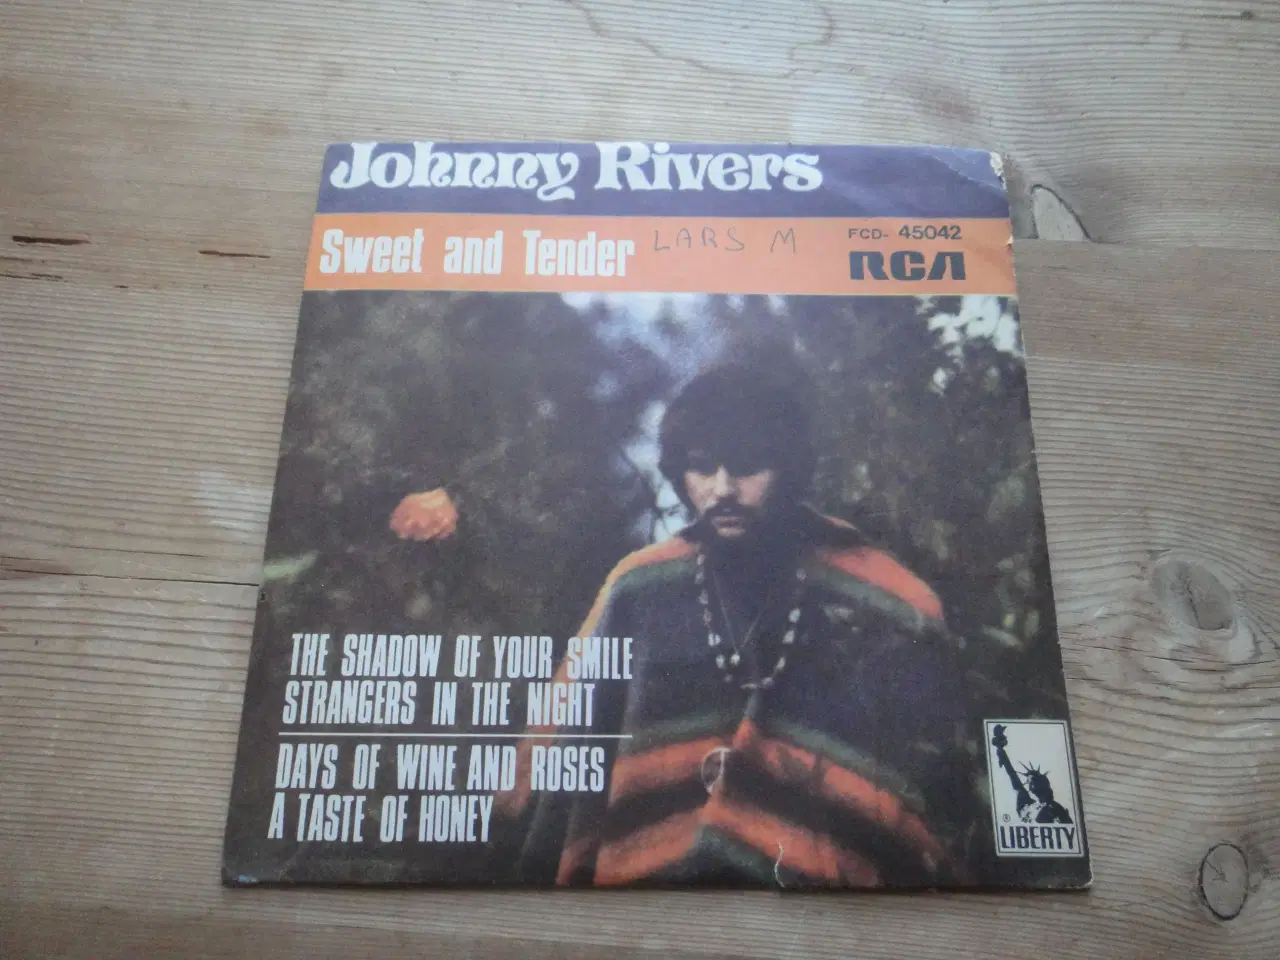 Billede 1 - EP - Johnny Rivers - The shadow of your 